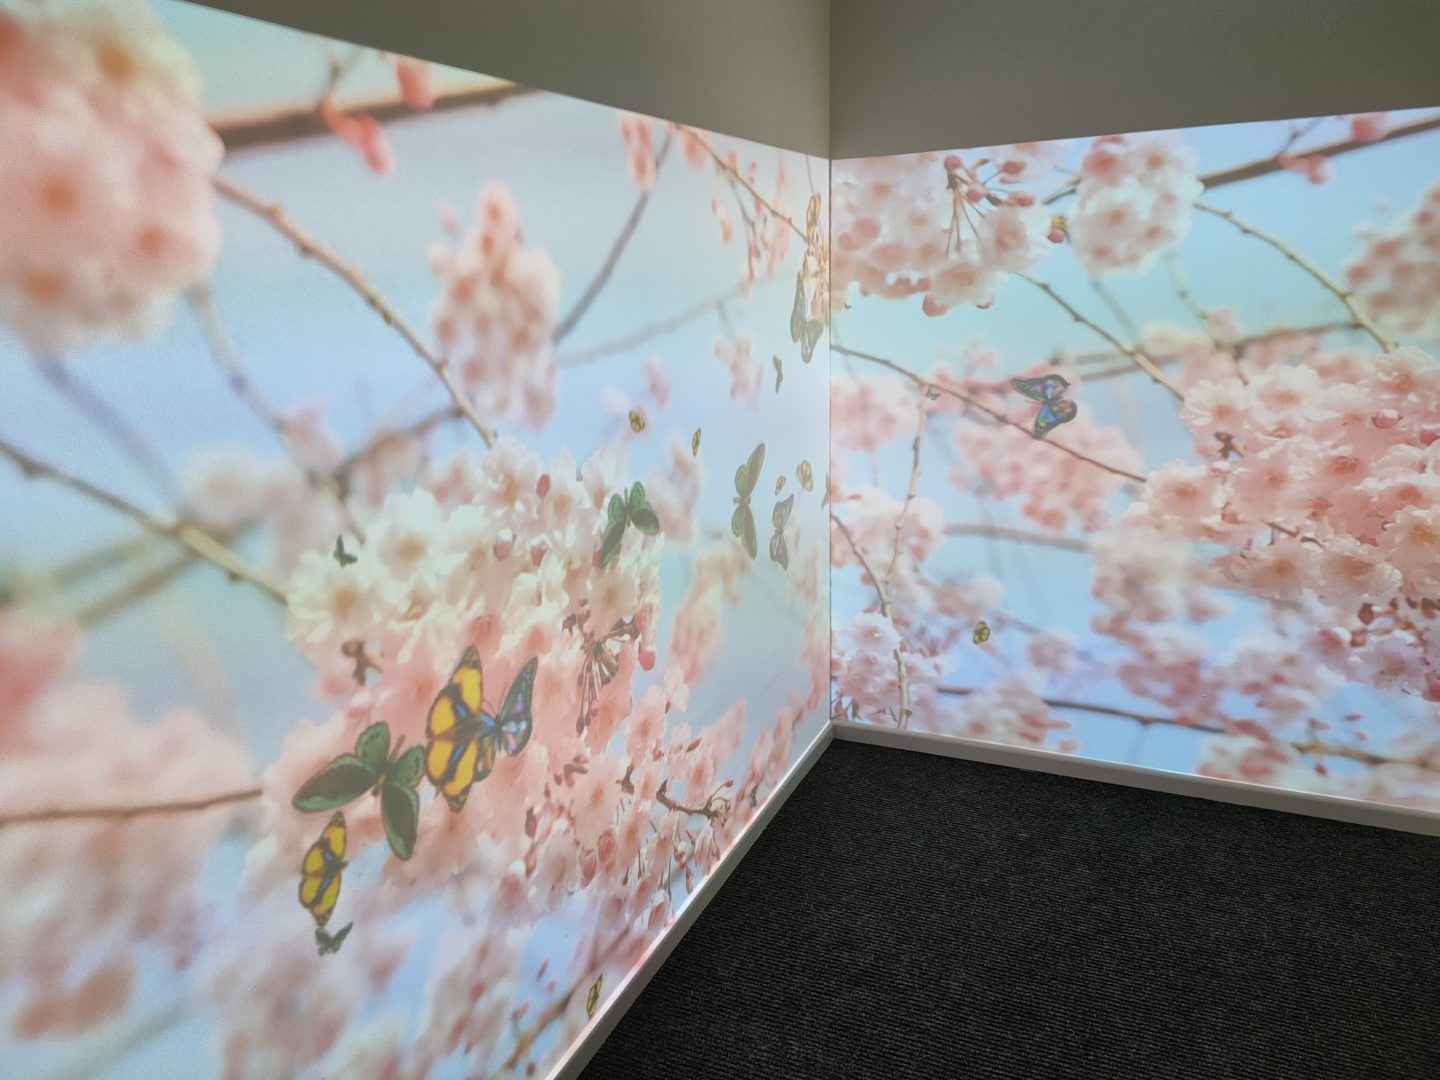 fully interactive immersive sensory room including 2 interactive walls. displaying butterflies over a blossom tree as you touch the surface of the walls